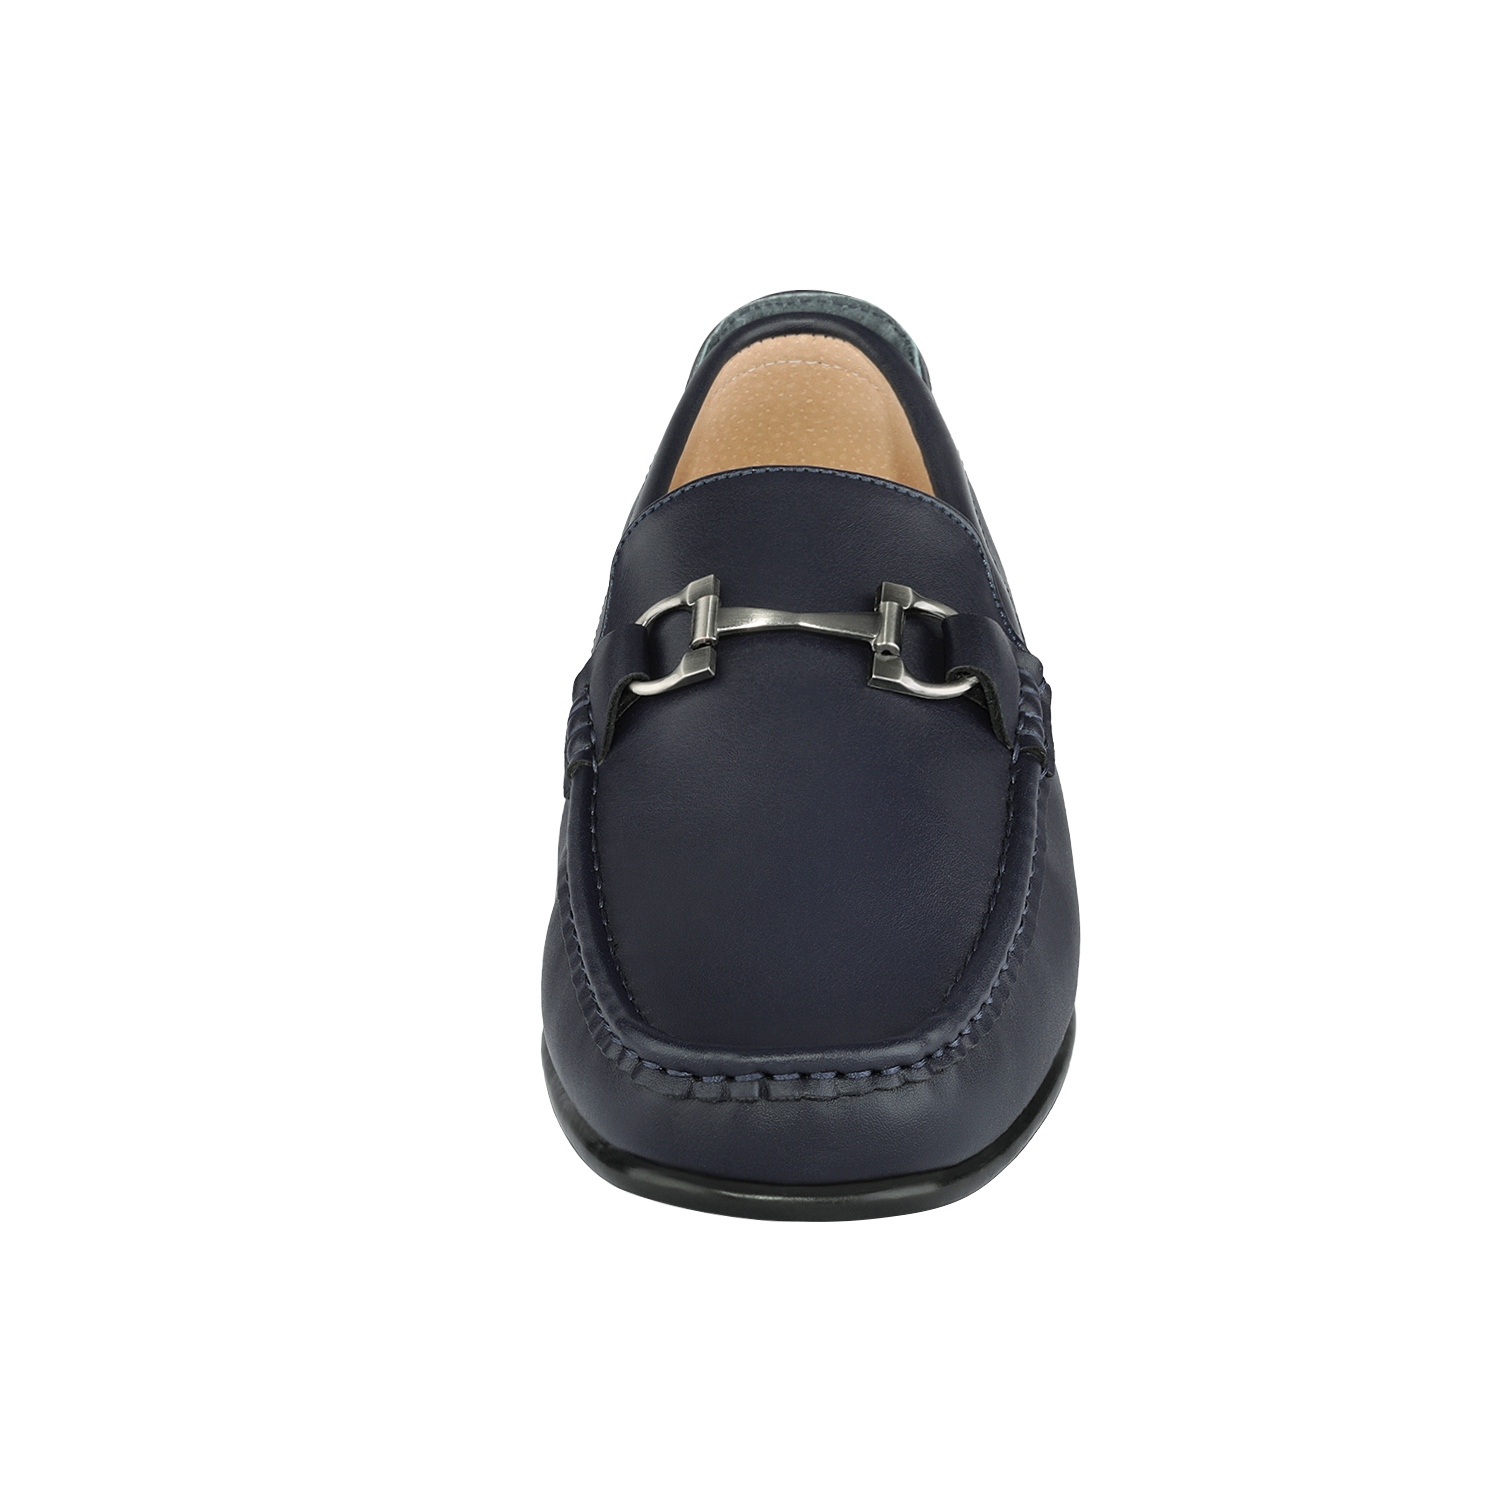 Bruno Marc Men's Moccasin Loafer Shoes Men Dress Loafers Slip On Casual Penny Comfort Outdoor Loafers HENRY-1 NAVY Size 9.5 - image 2 of 5